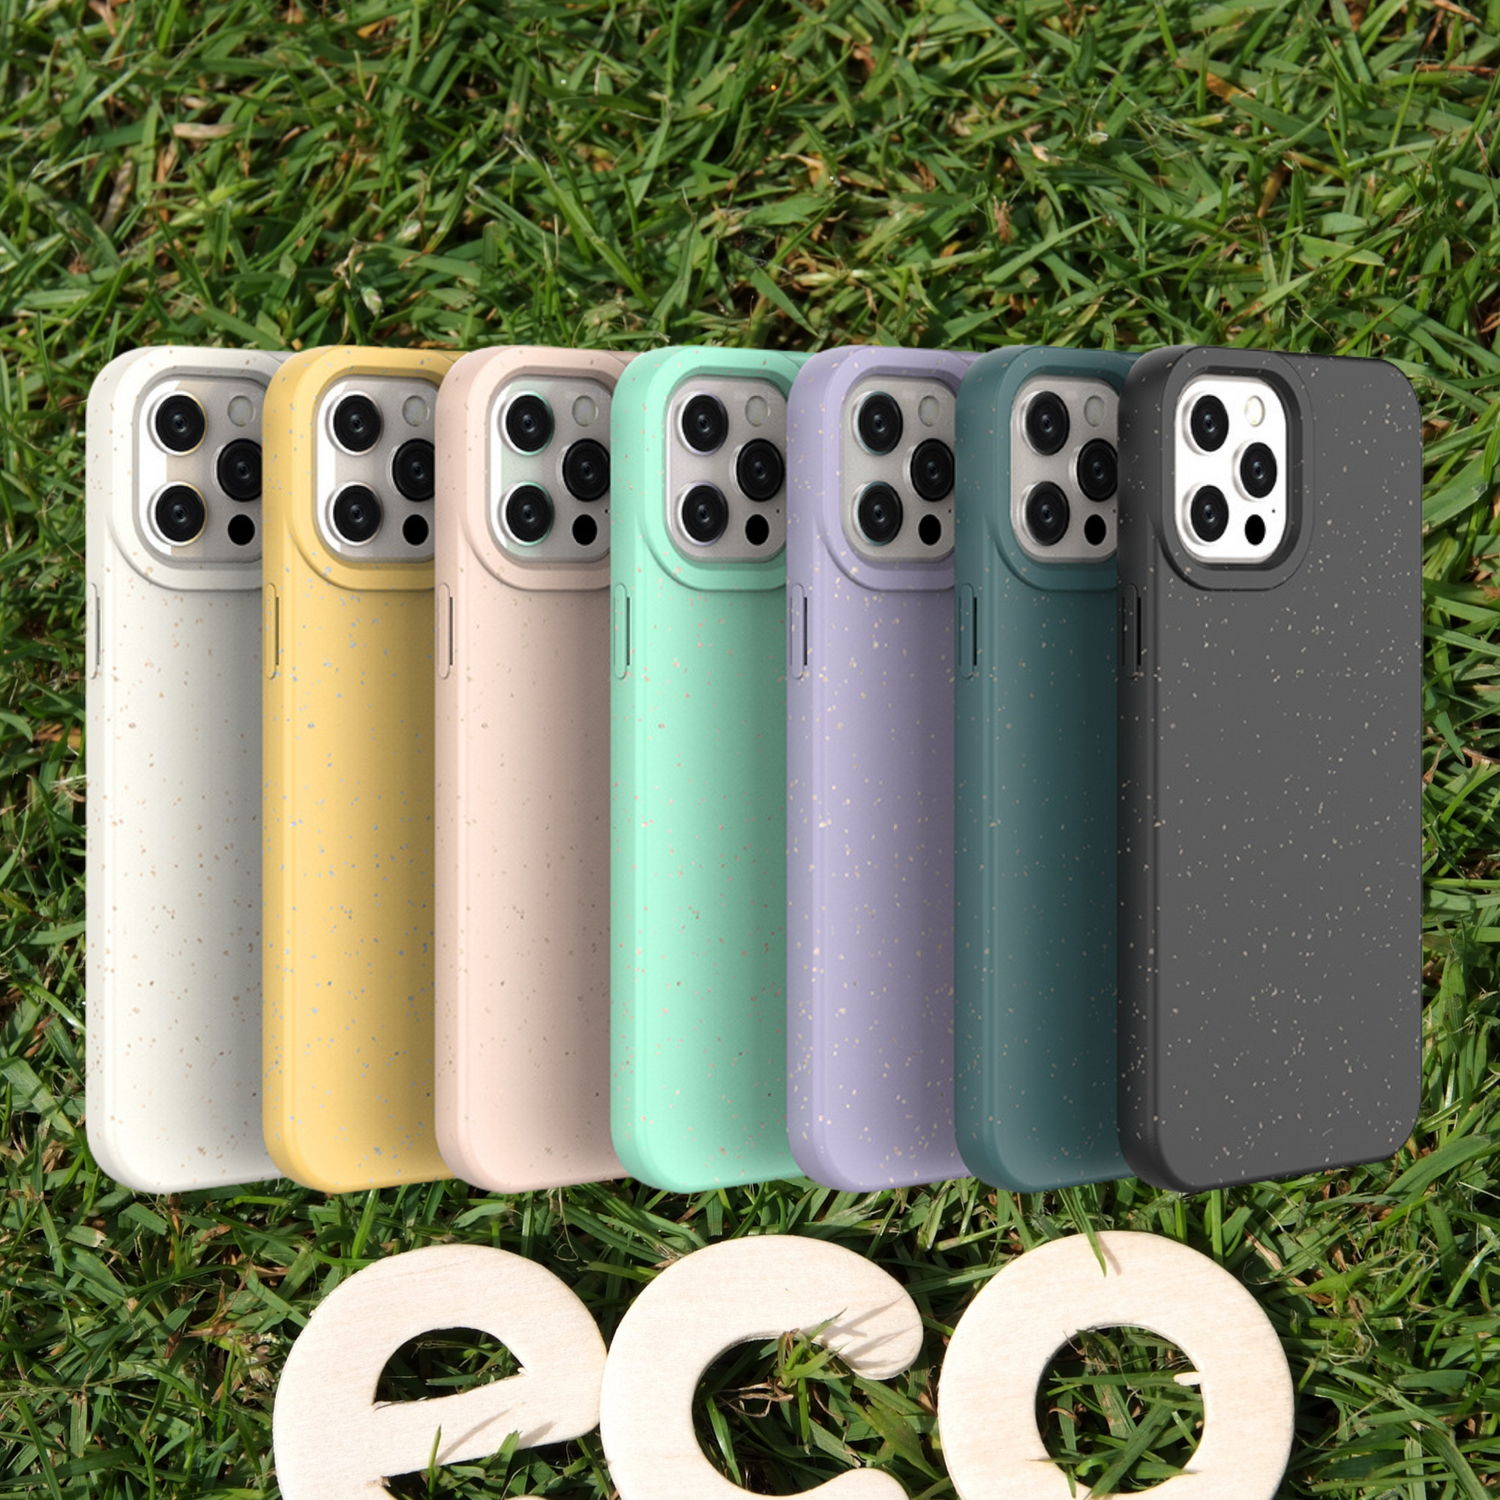 Biodegradable Phone Cases That Look Cool & Stand Out